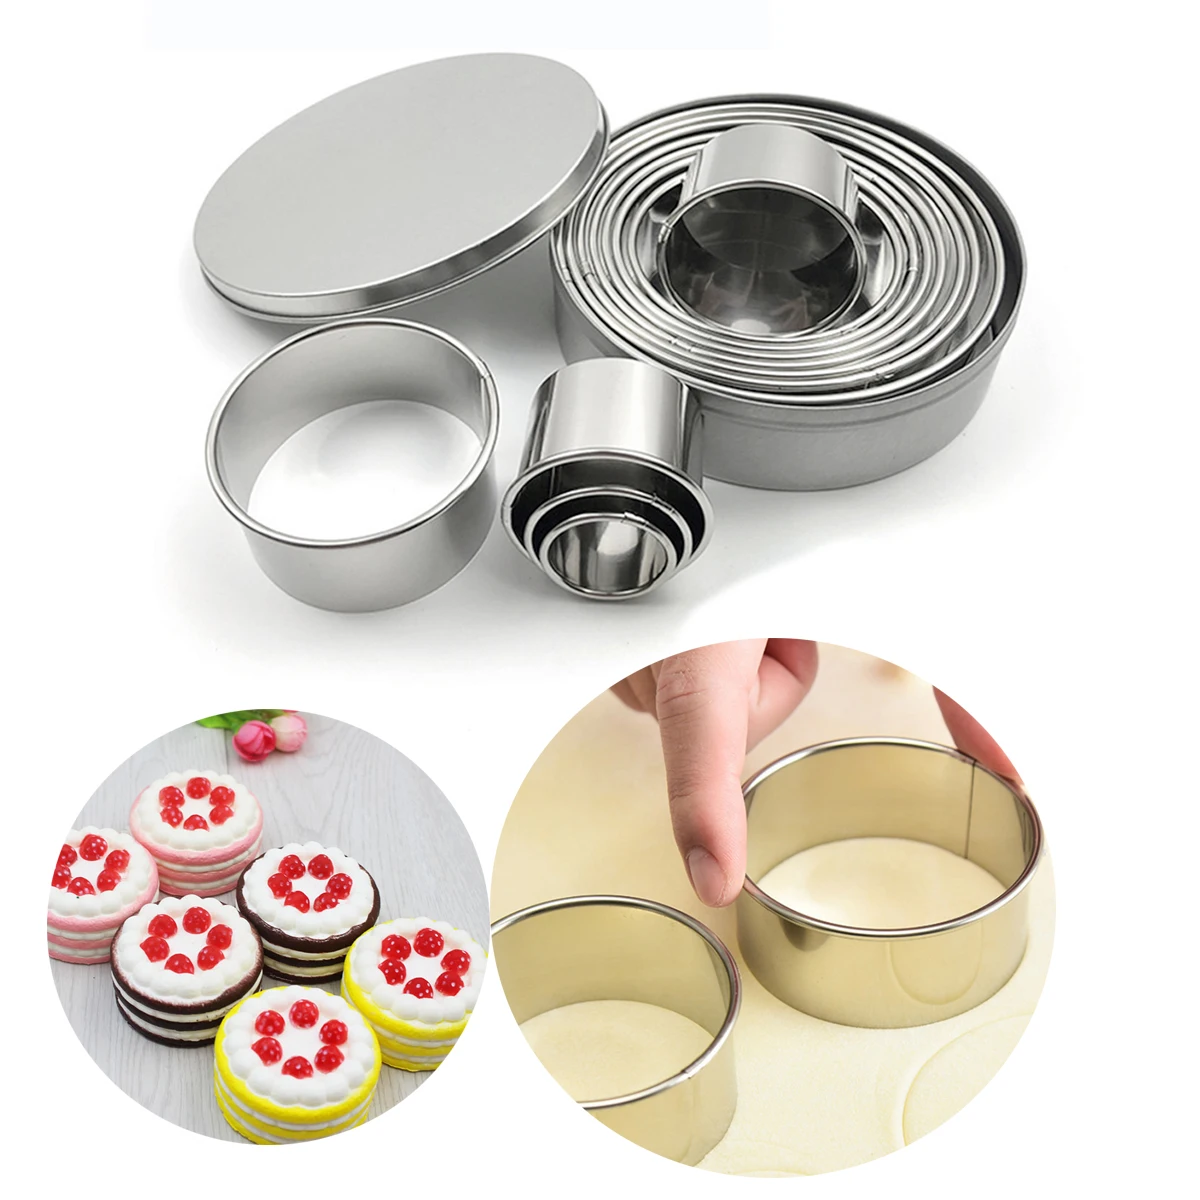 

12pcs Stainless Steel Mousse Ring 12pcs Round Cake Moulds Donut Fondant Cookie Moulds Baking Tools